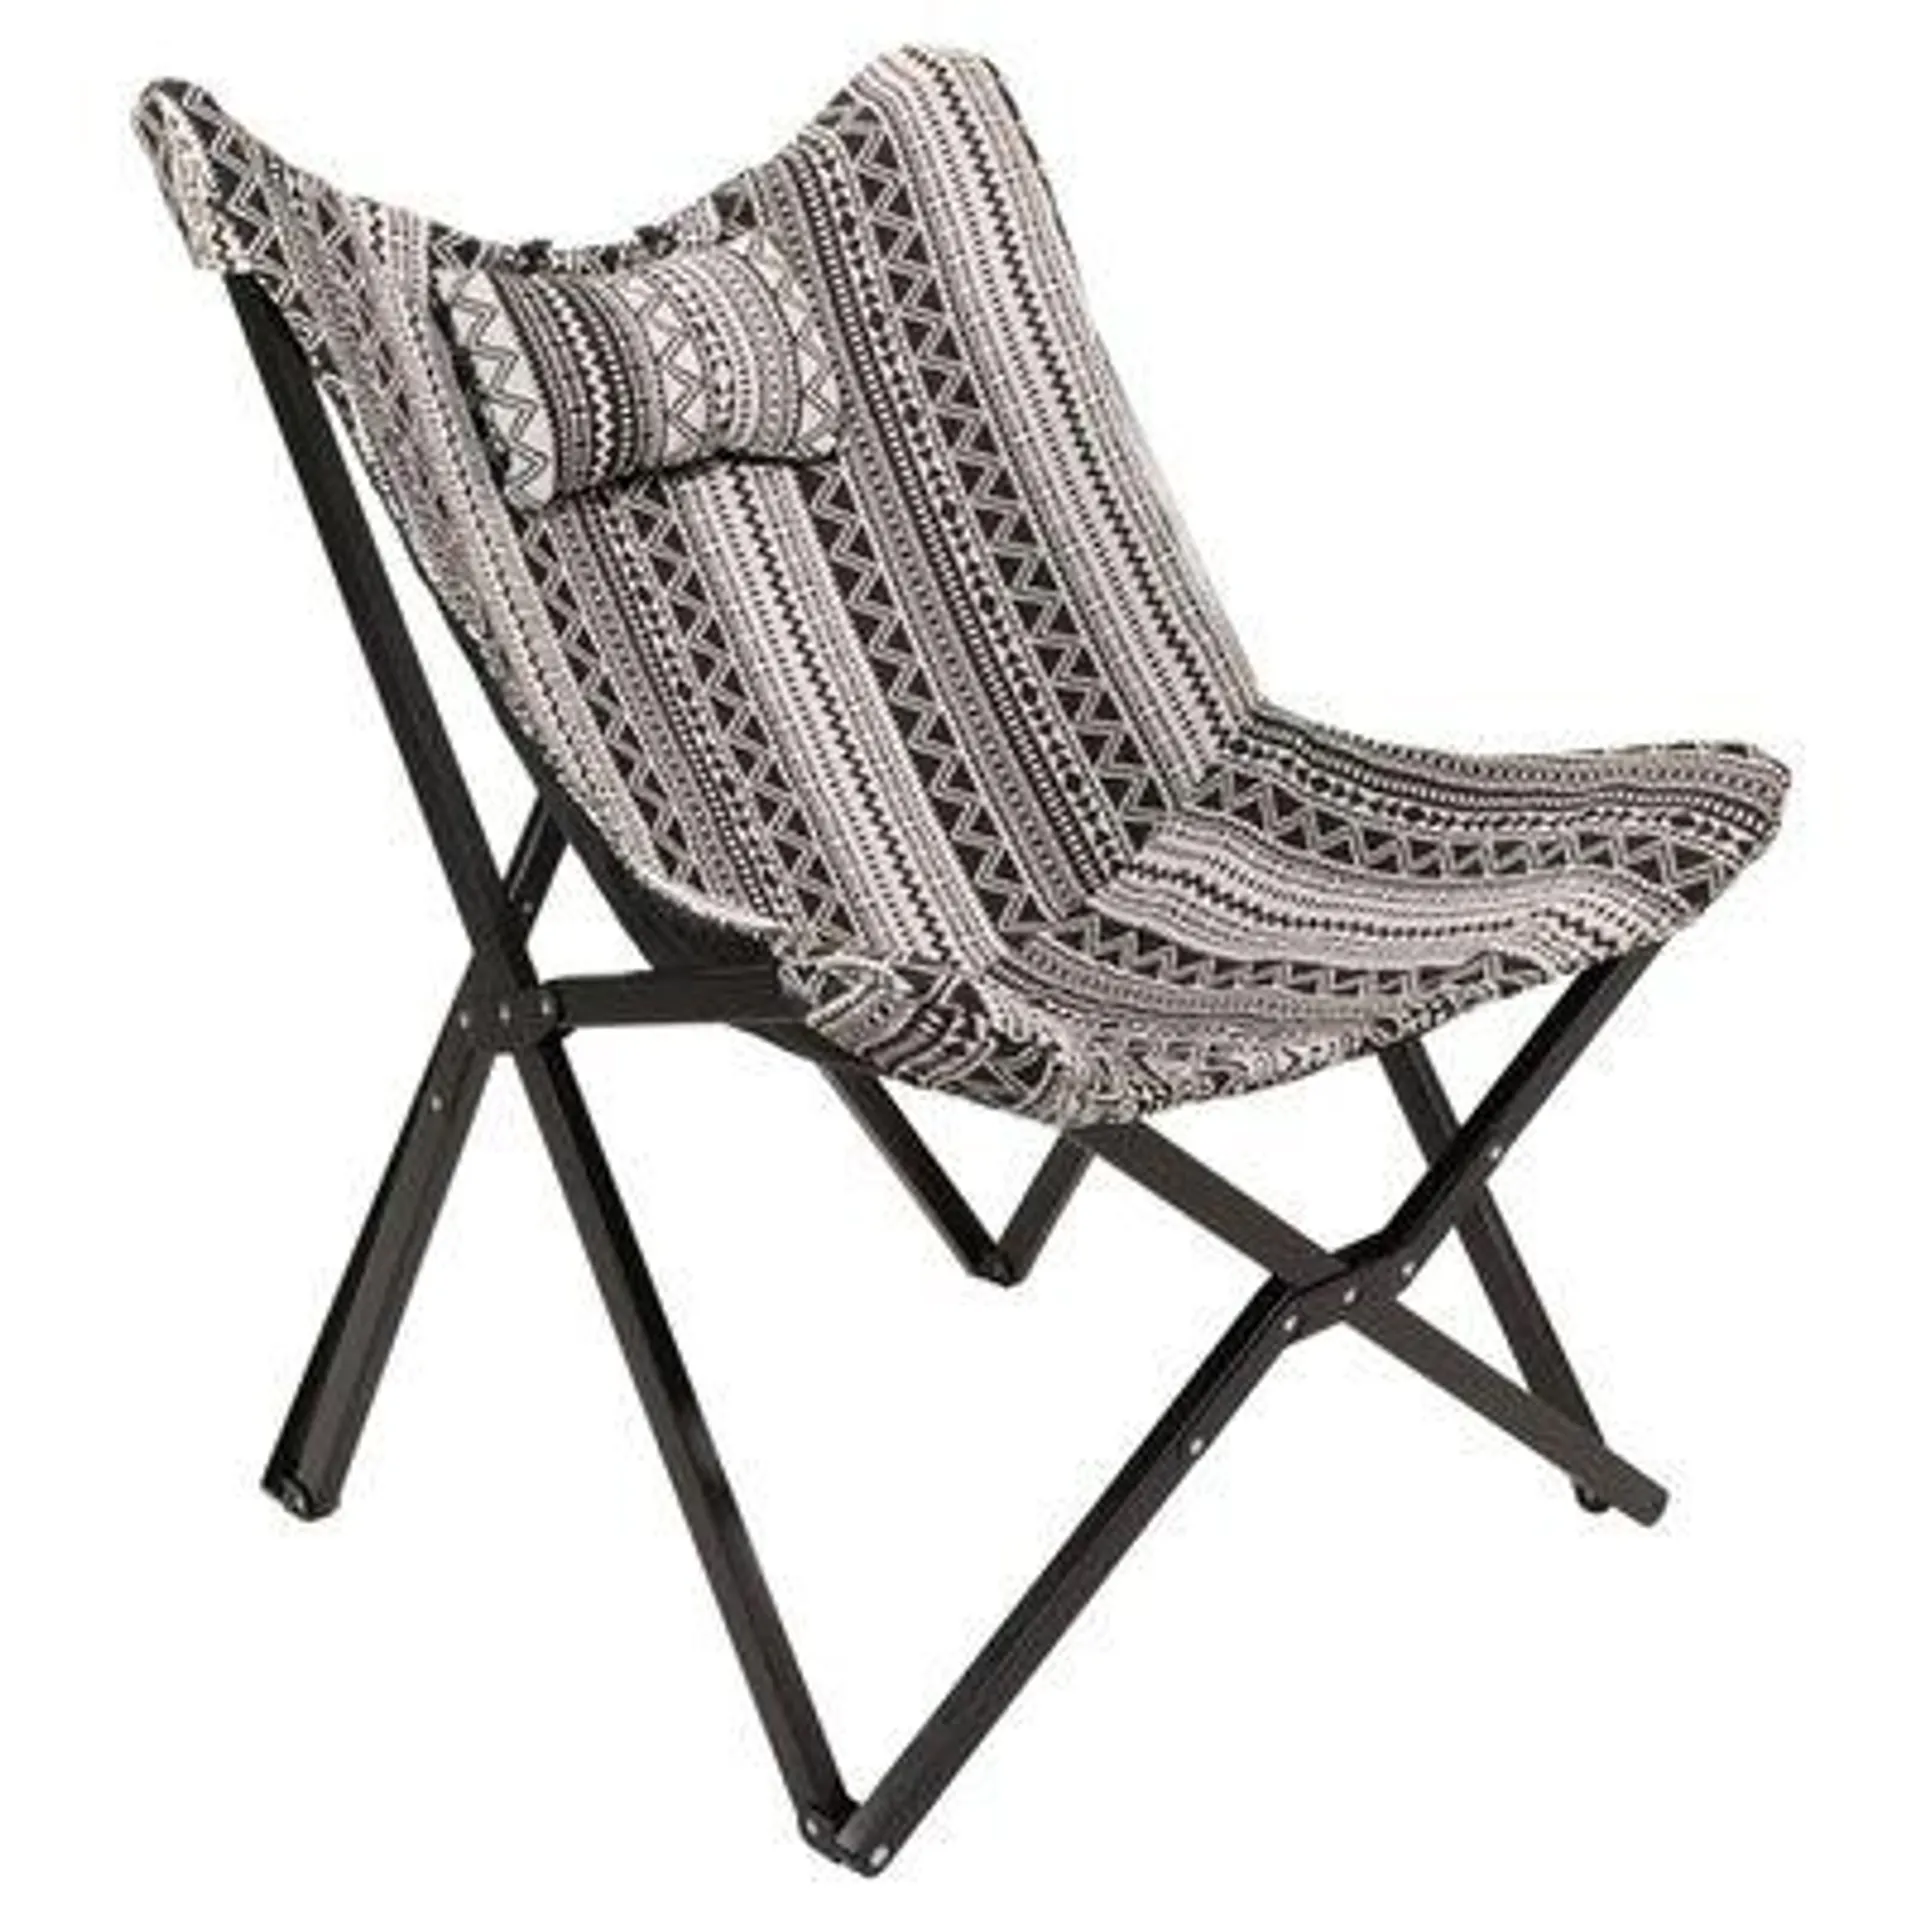 Lesli Living Butterfly Chair Aztec 70x81.5x98 cm Black and White